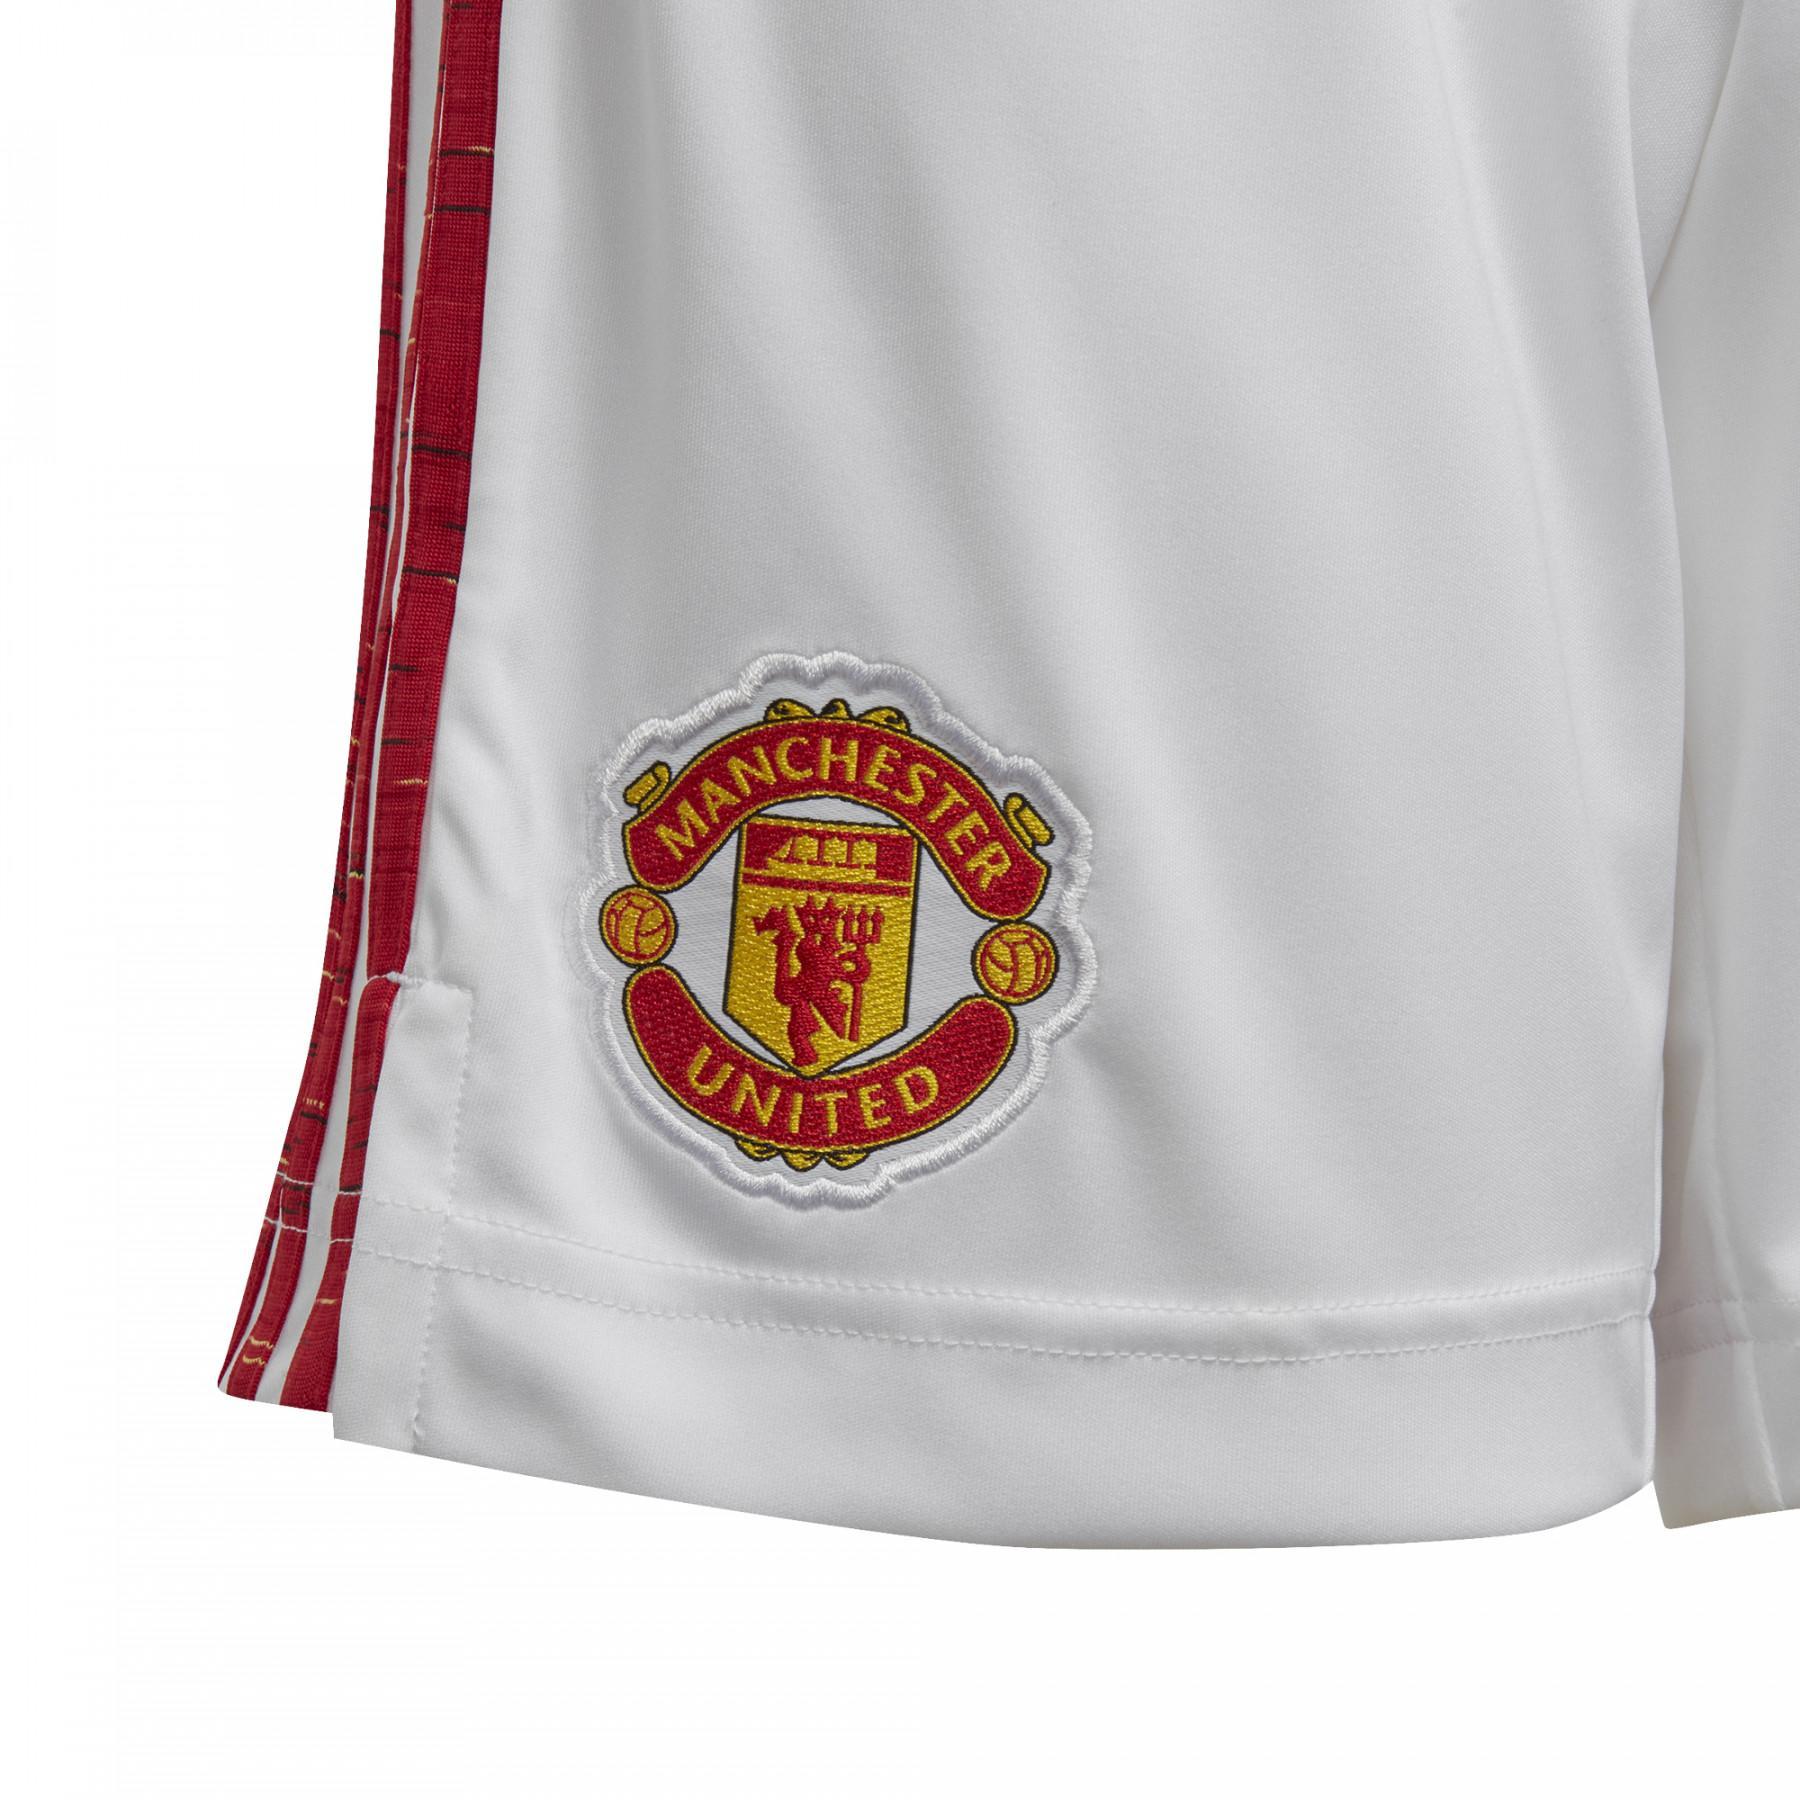 Short thuis kind Manchester United 2020/21